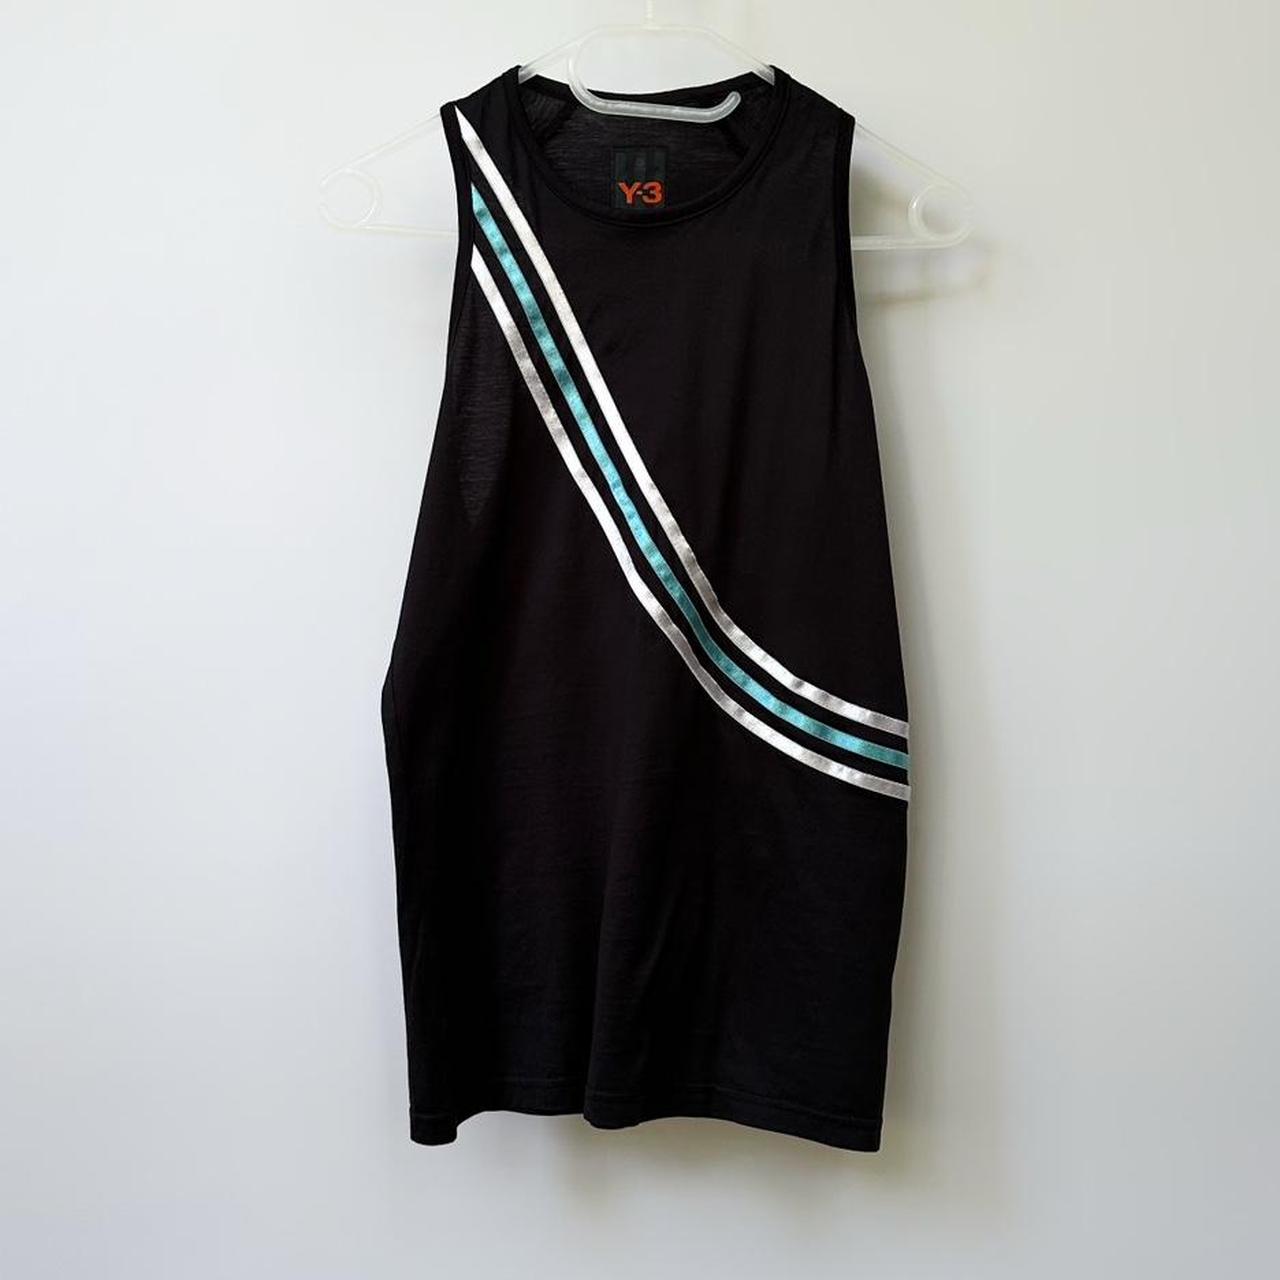 Y-3 Cropped Sleeveless Top in Black